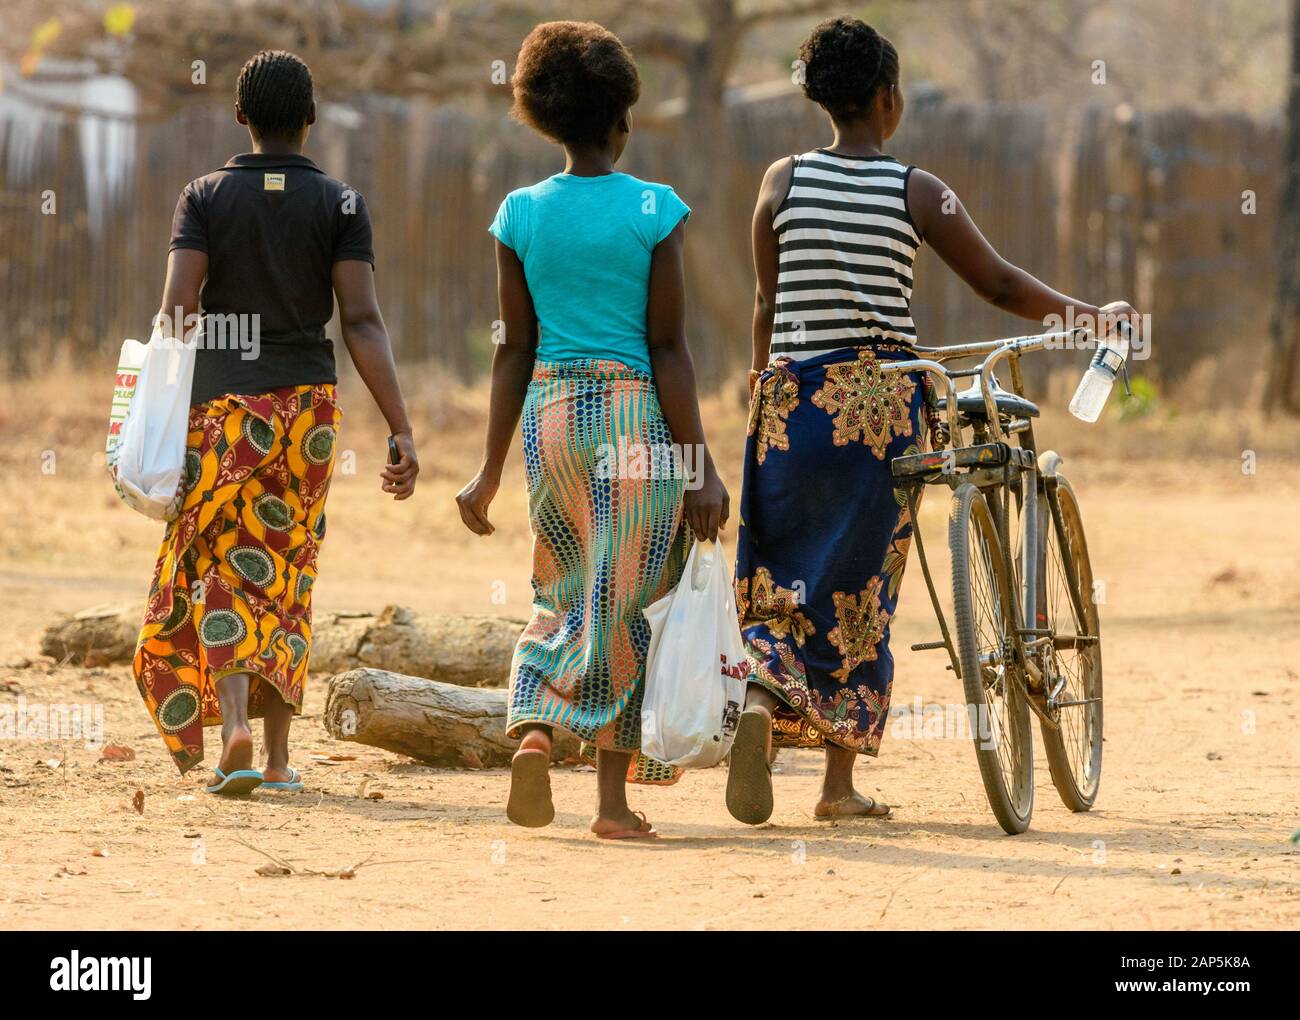 three. young Malawian women walking and pushing a bicycle along a dirt road in a township Stock Photo